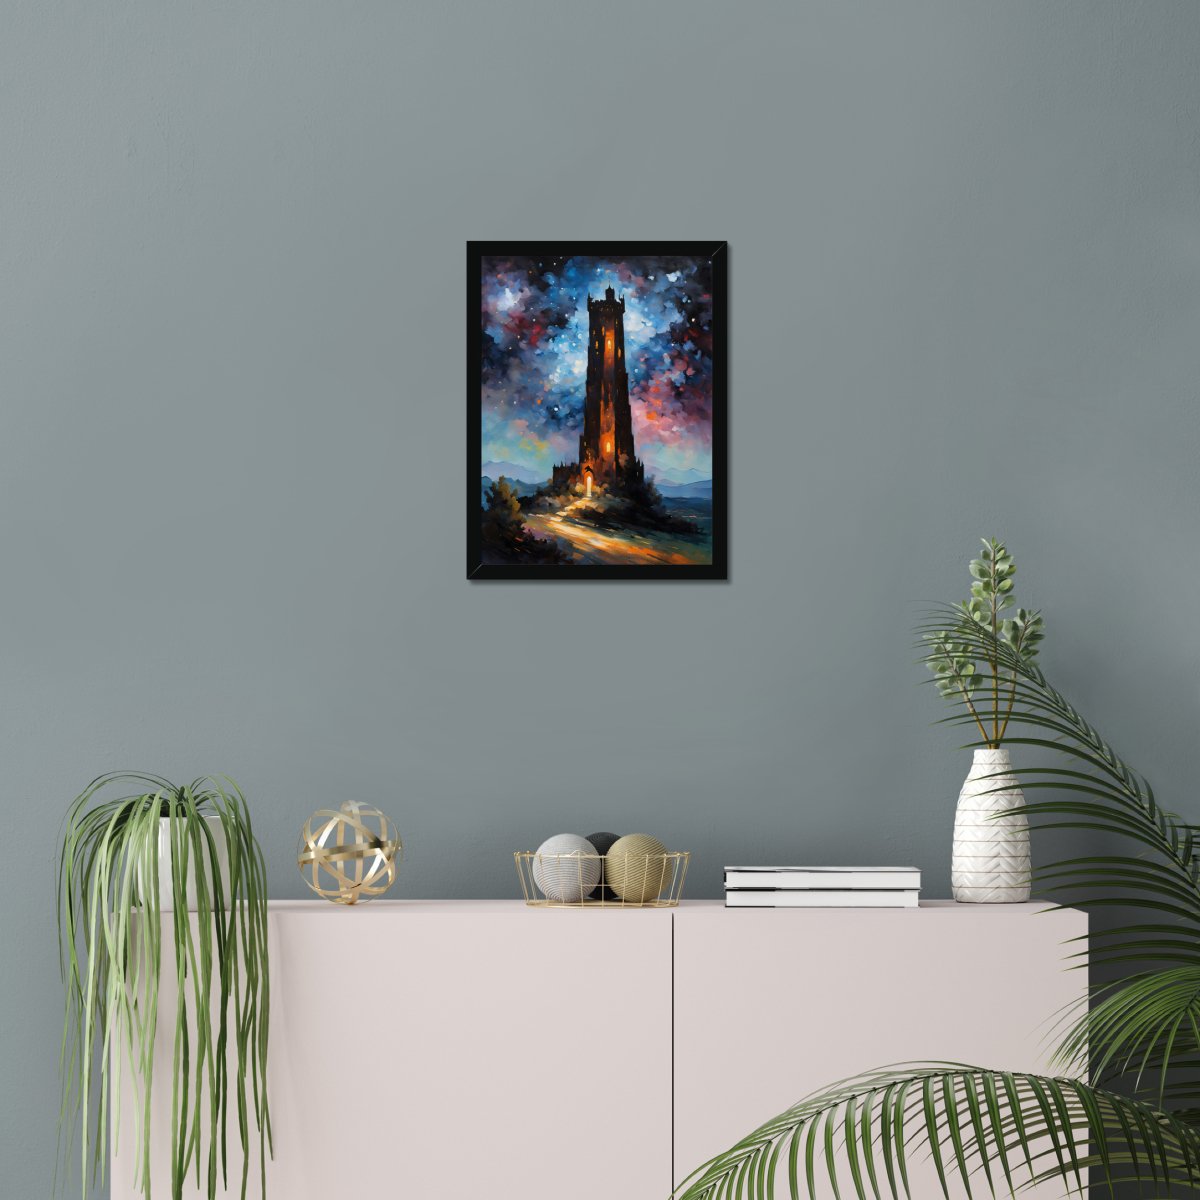 Dreadful stars tower - Art print - Poster - Ever colorful